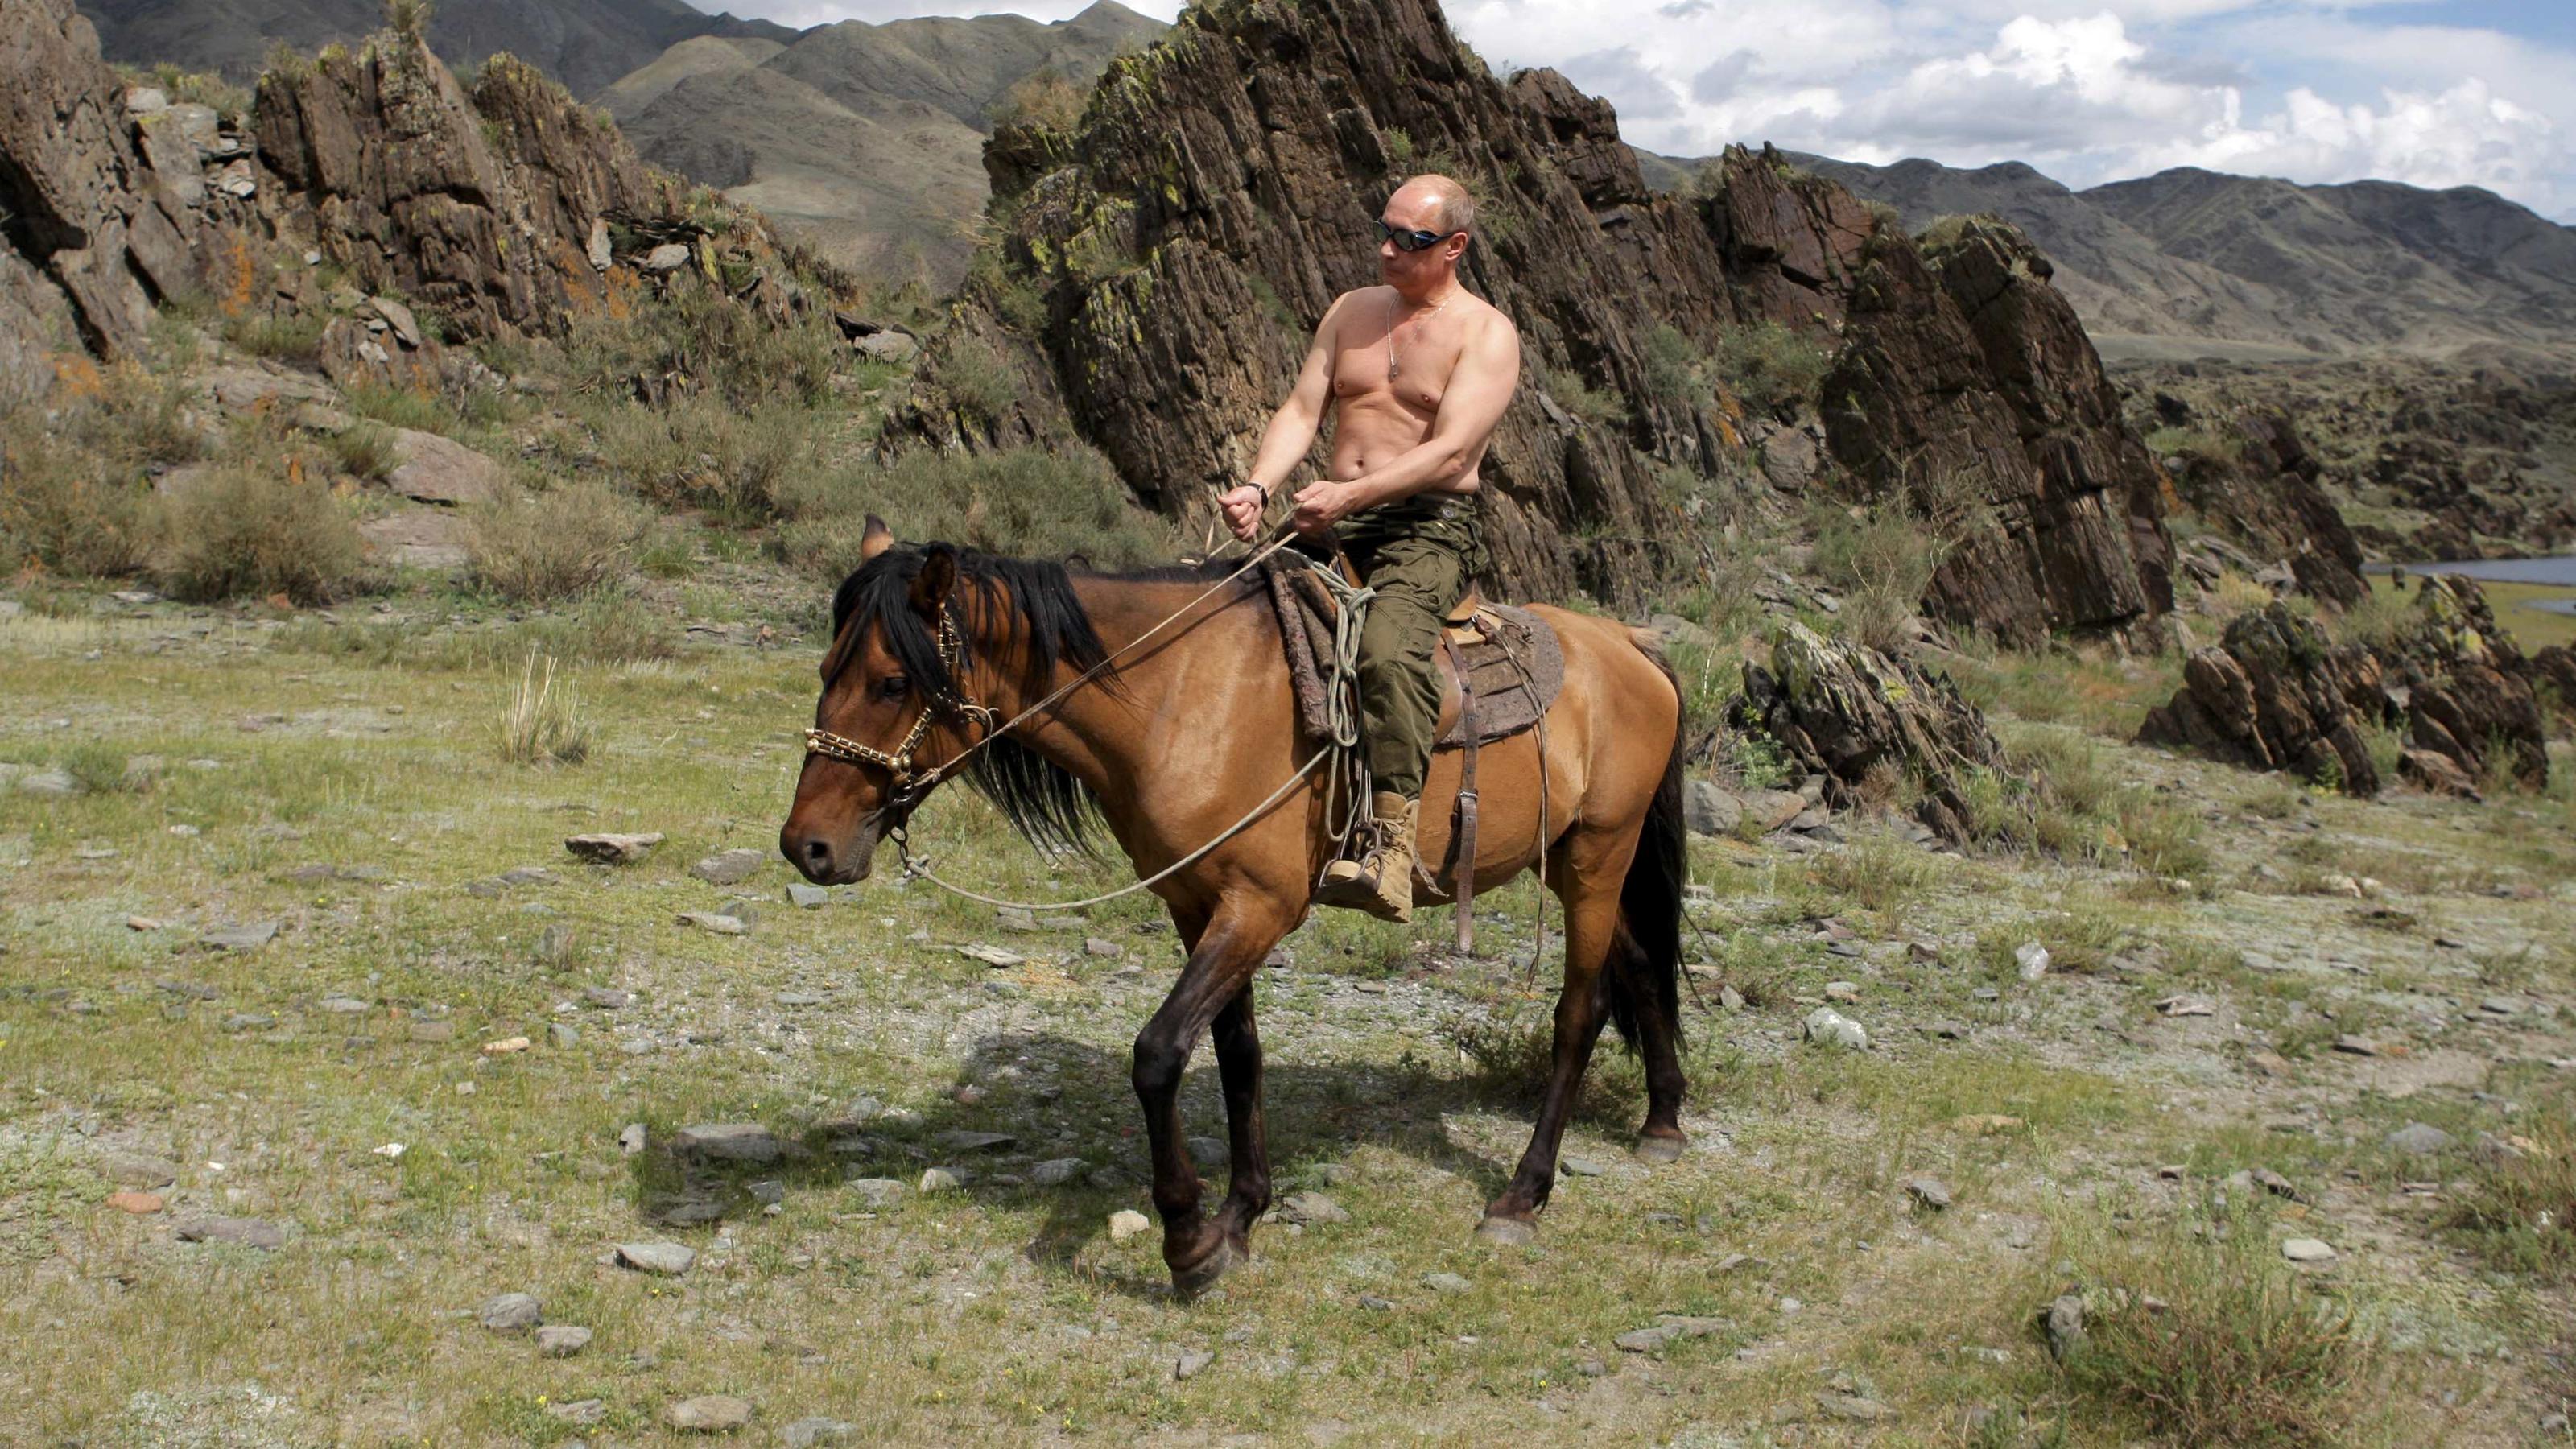 Russia's Prime Minister Vladimir Putin rides a horse in southern Siberia's Tuva region in this August 3, 2009 file photo. Russians will go to the polls on March 4, 2012, to choose one of five candidates to be their new president. Picture taken August